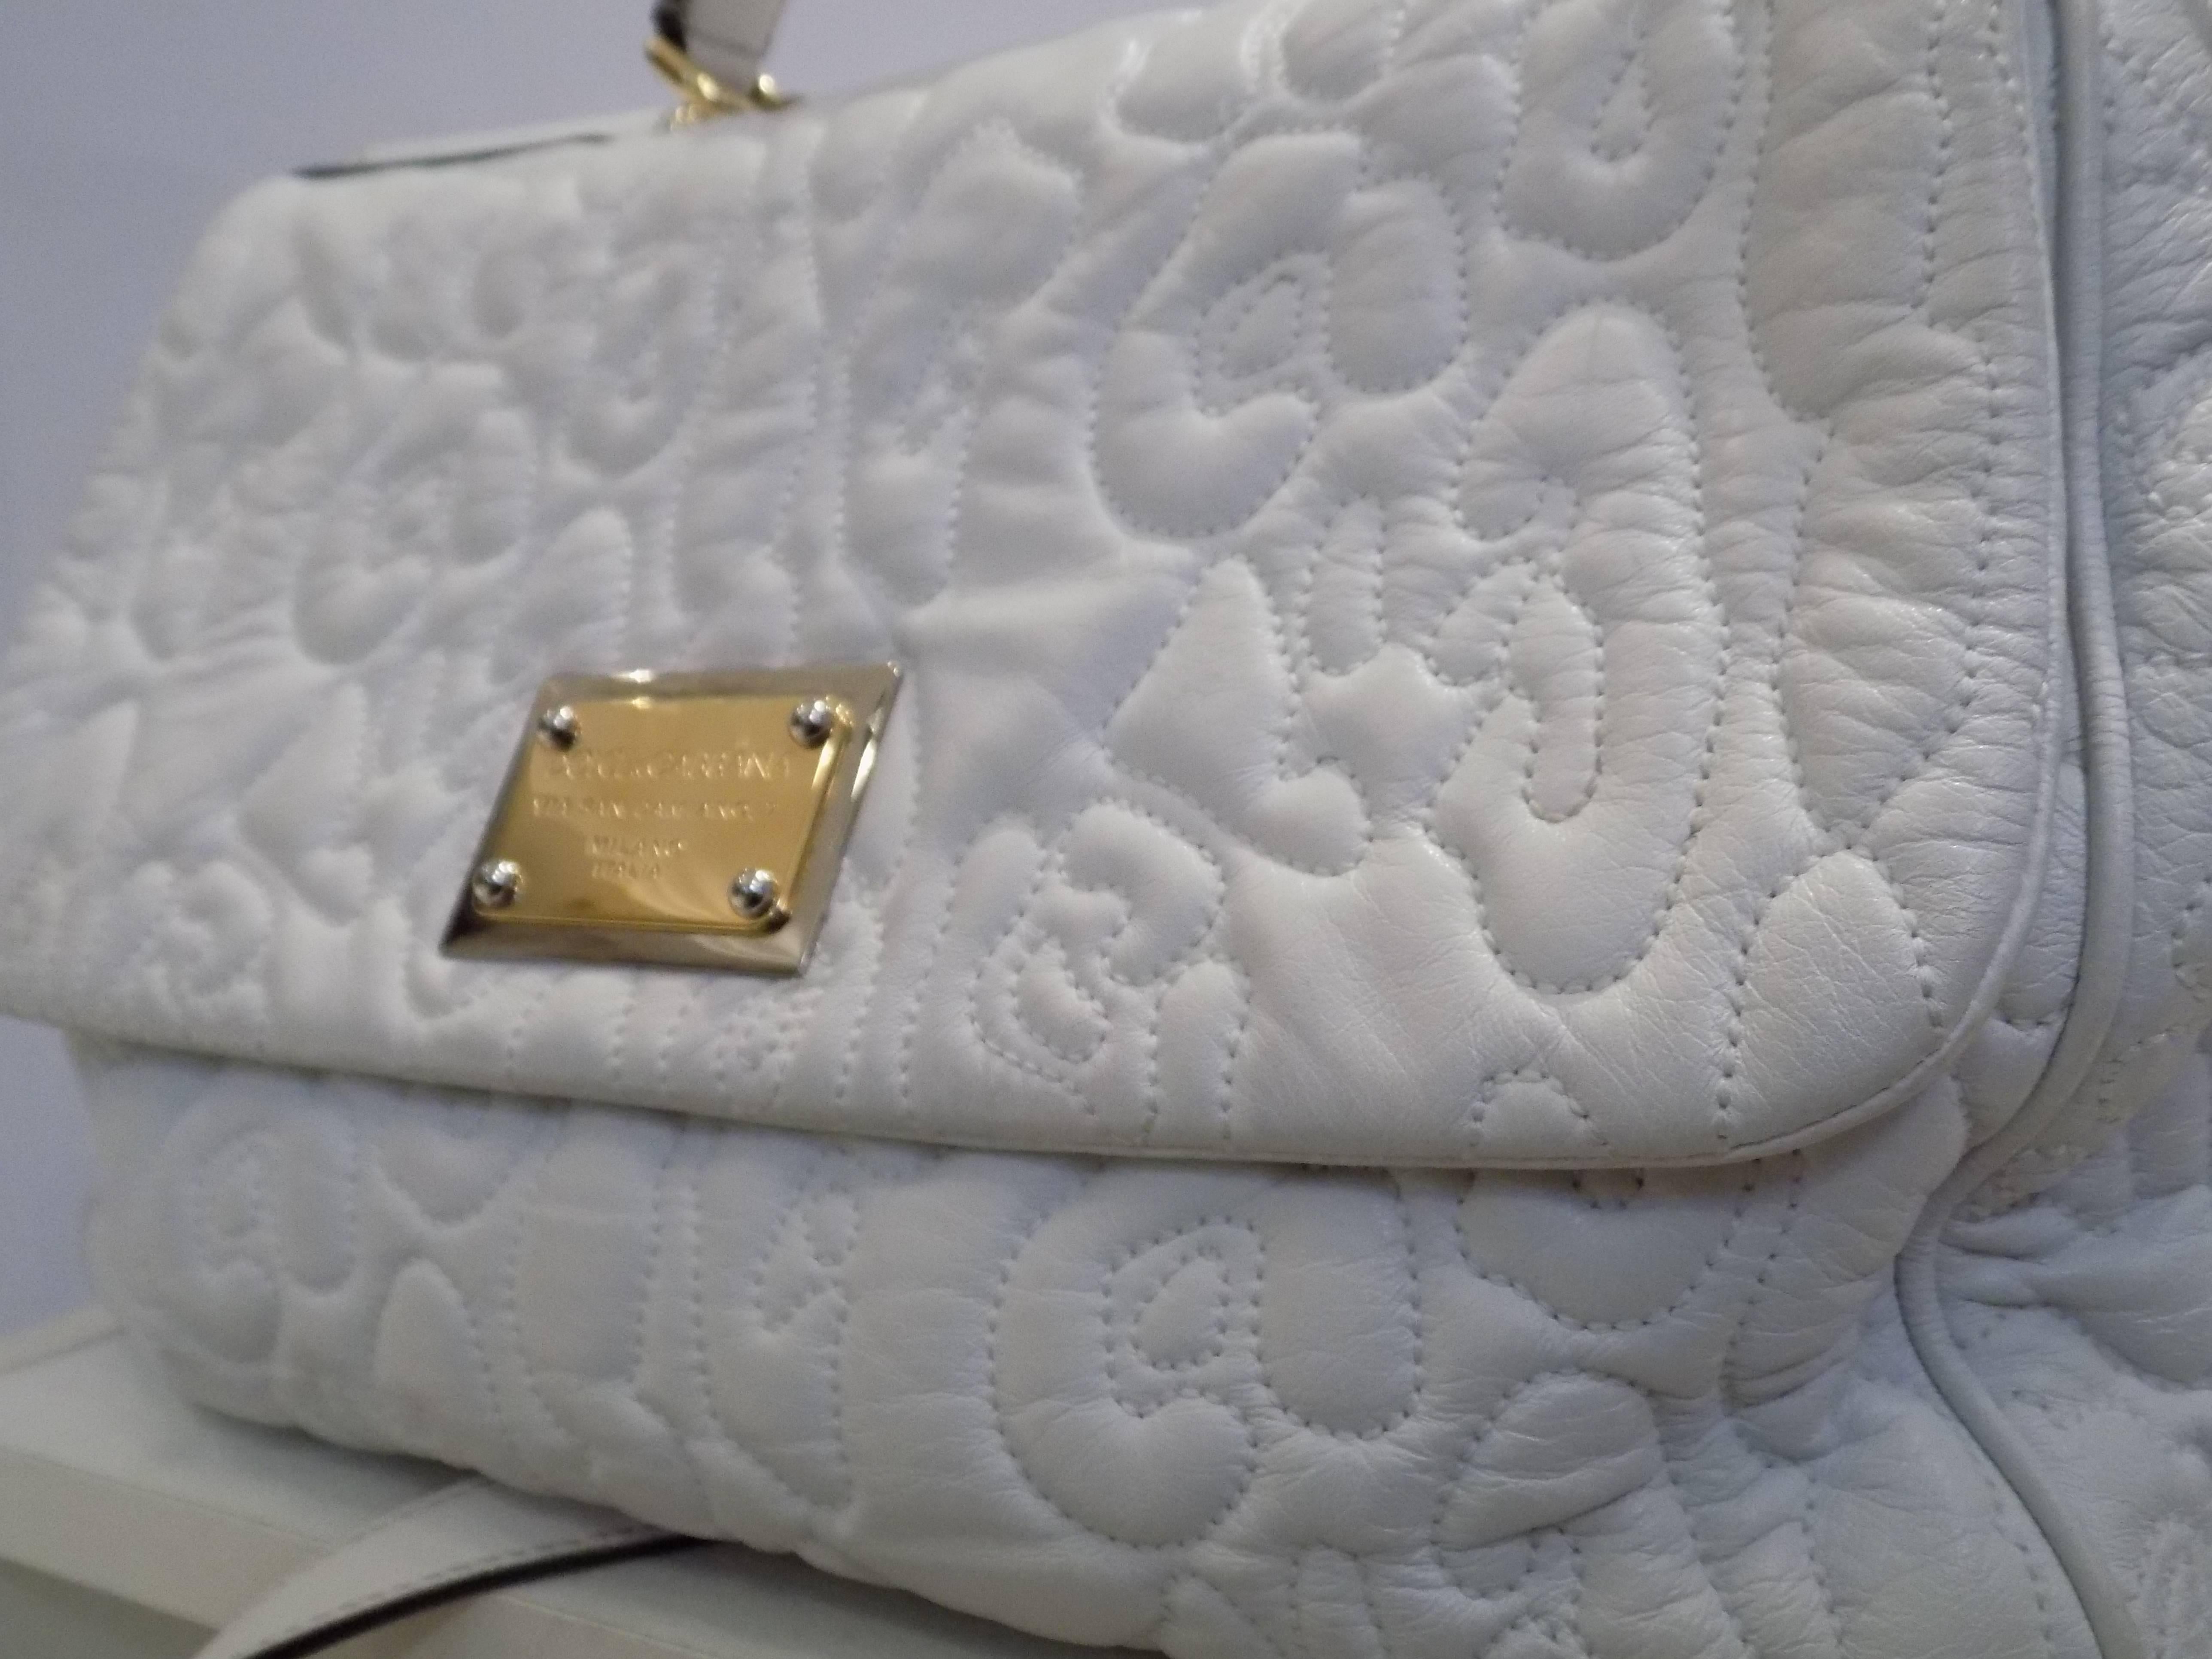 Dolce & Gabbana white leather bag totally made in italy
Gold tone hardware
Leopard Lining
Shoulder bag lenght: 120 cm